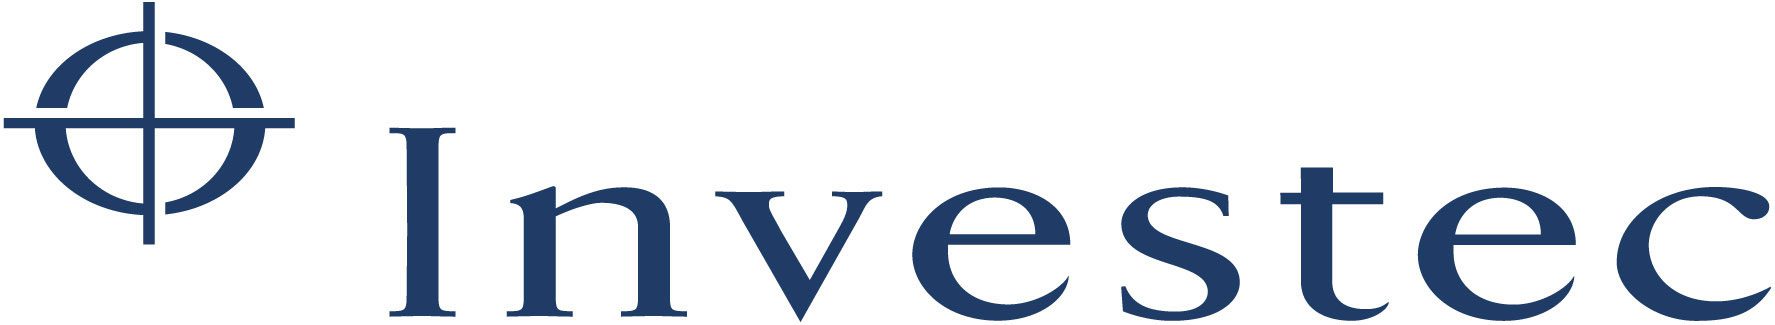 Investec Wealth & Investment Limited